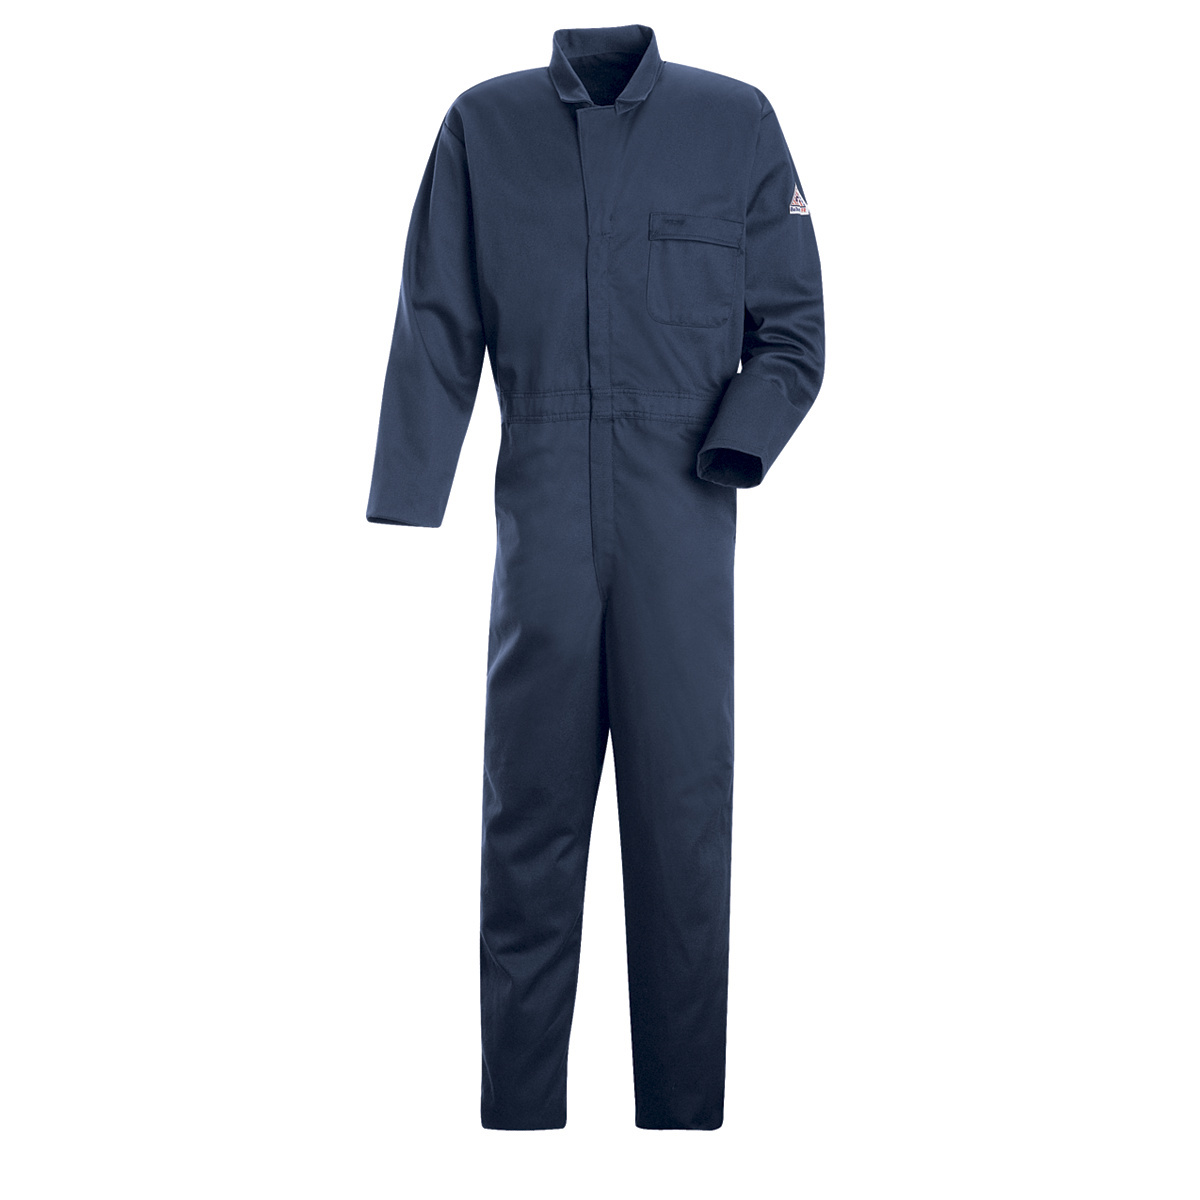 Bulwark® 2X Regular Navy Blue EXCEL FR® Twill Cotton Flame Resistant Coveralls With Zipper Front Closure